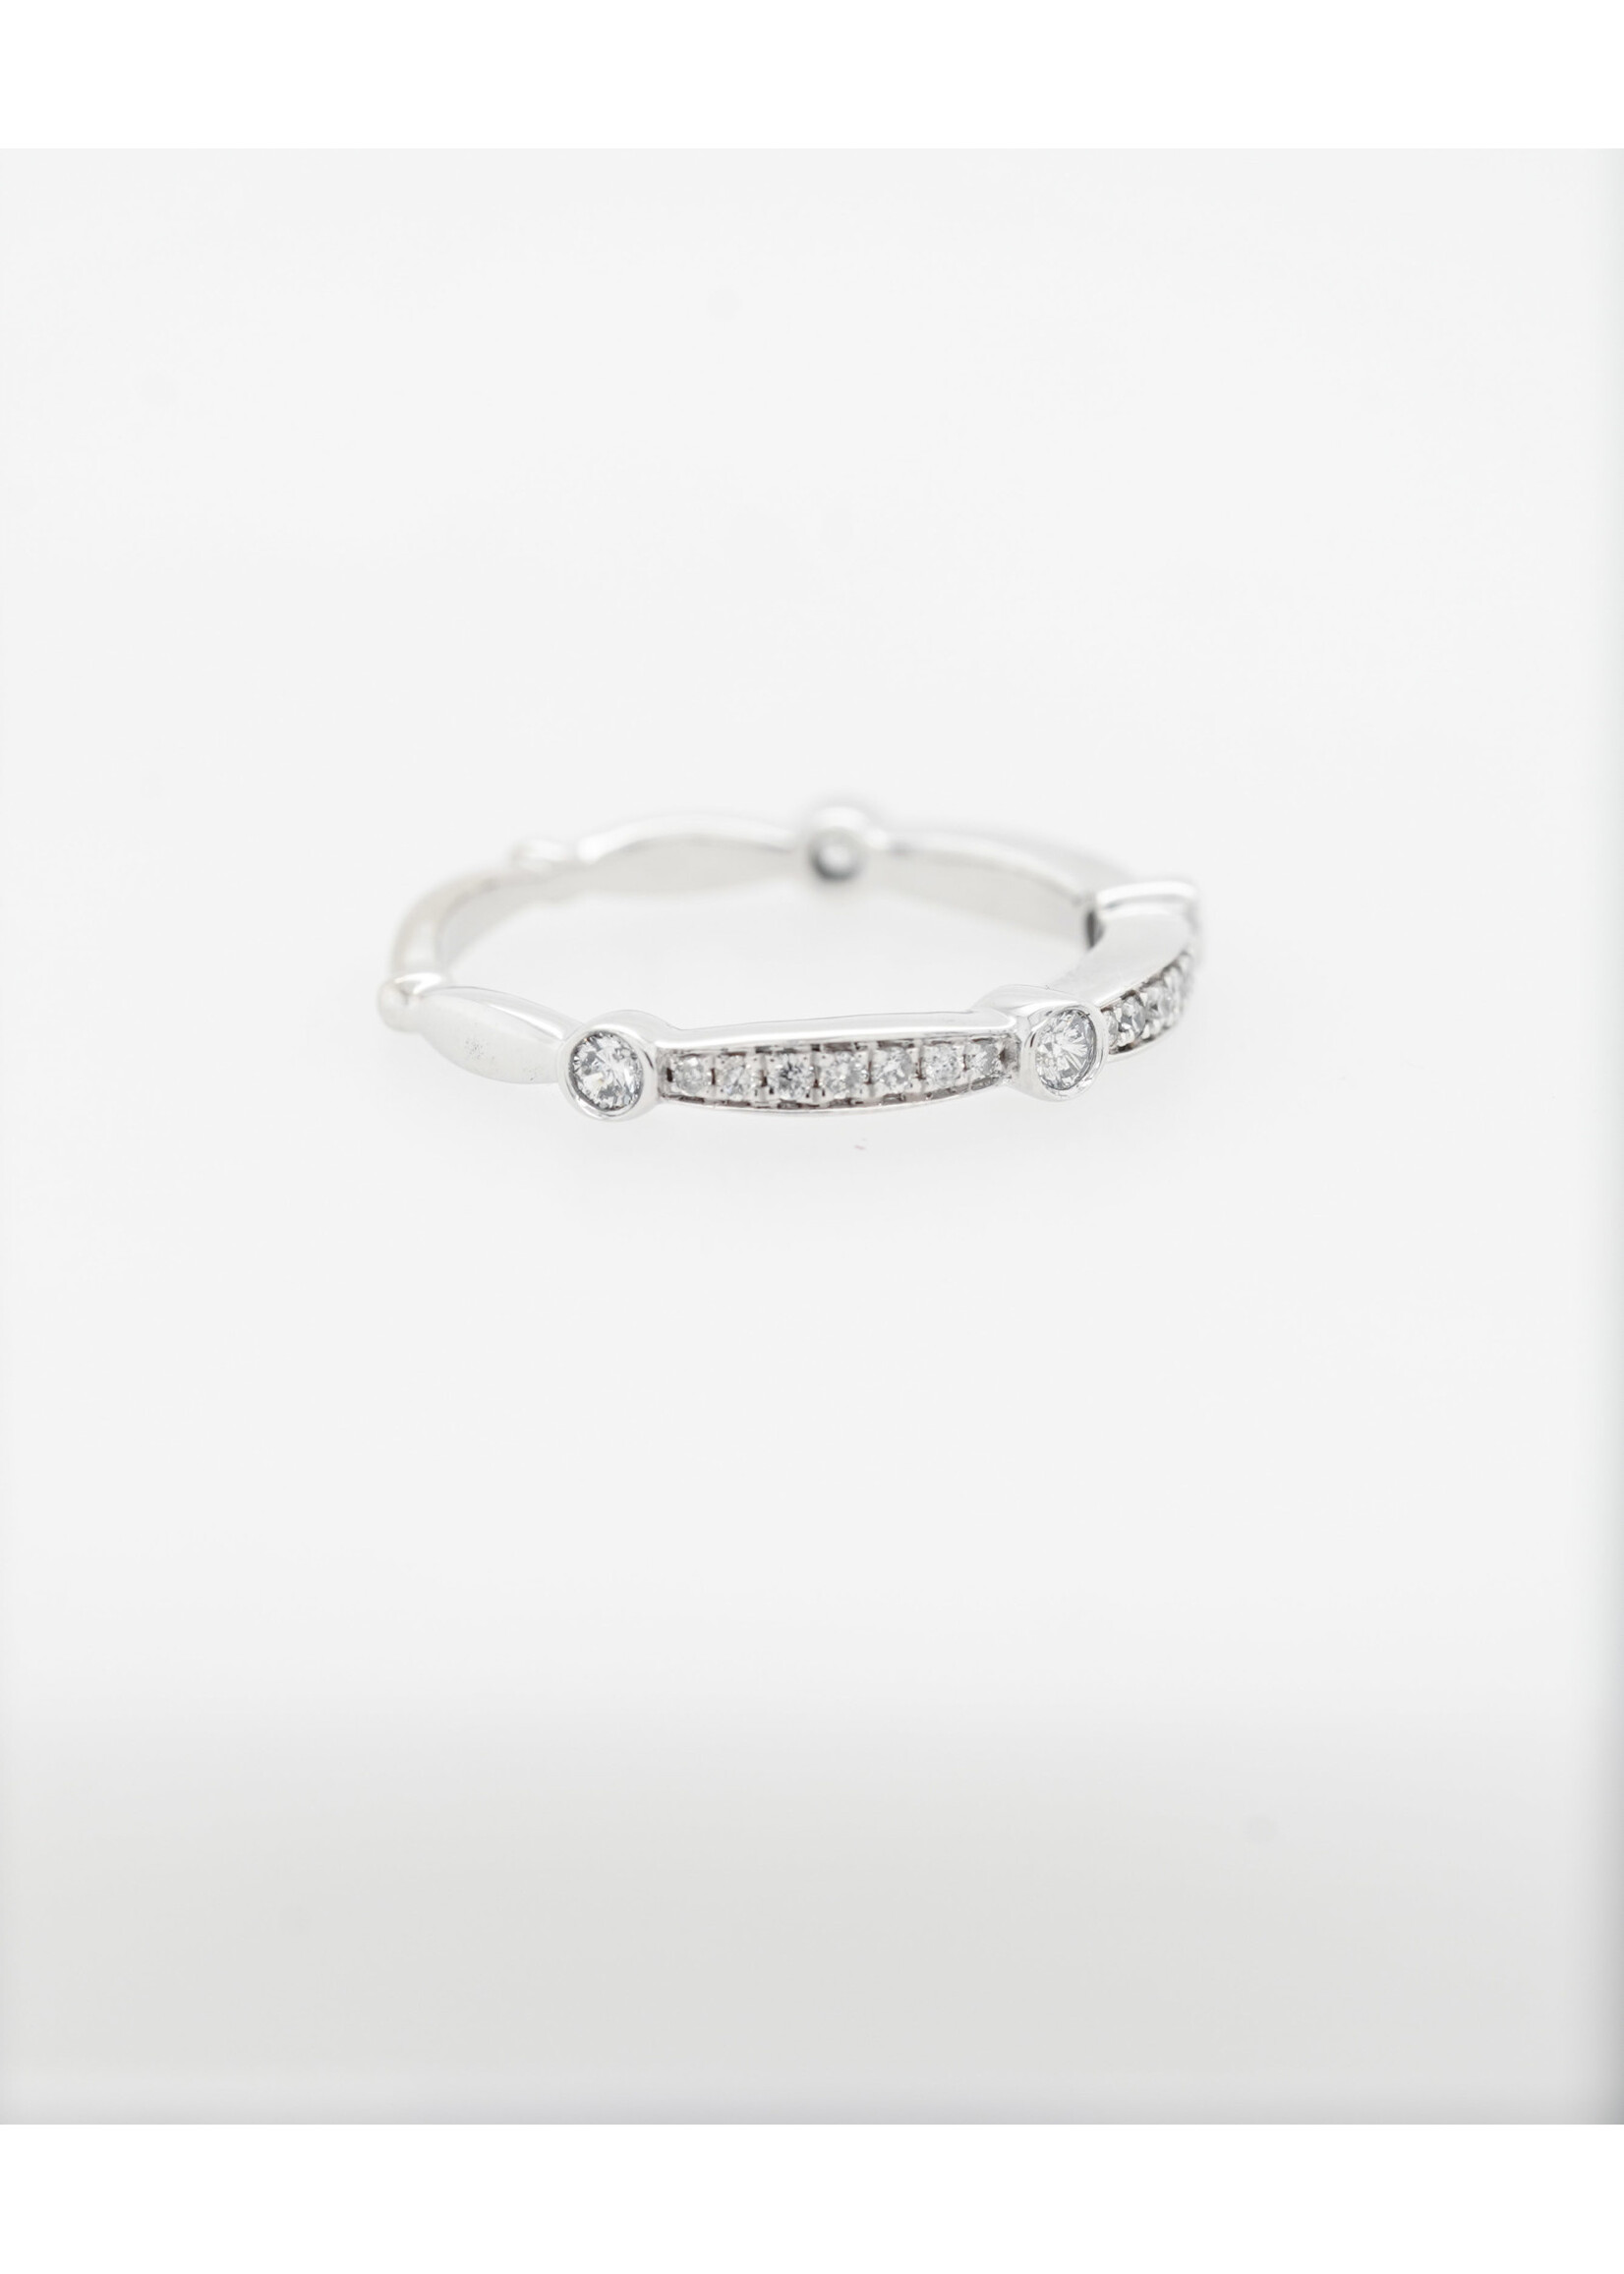 14KW 2.4g .30tw Diamond Stackable Band (size 7)